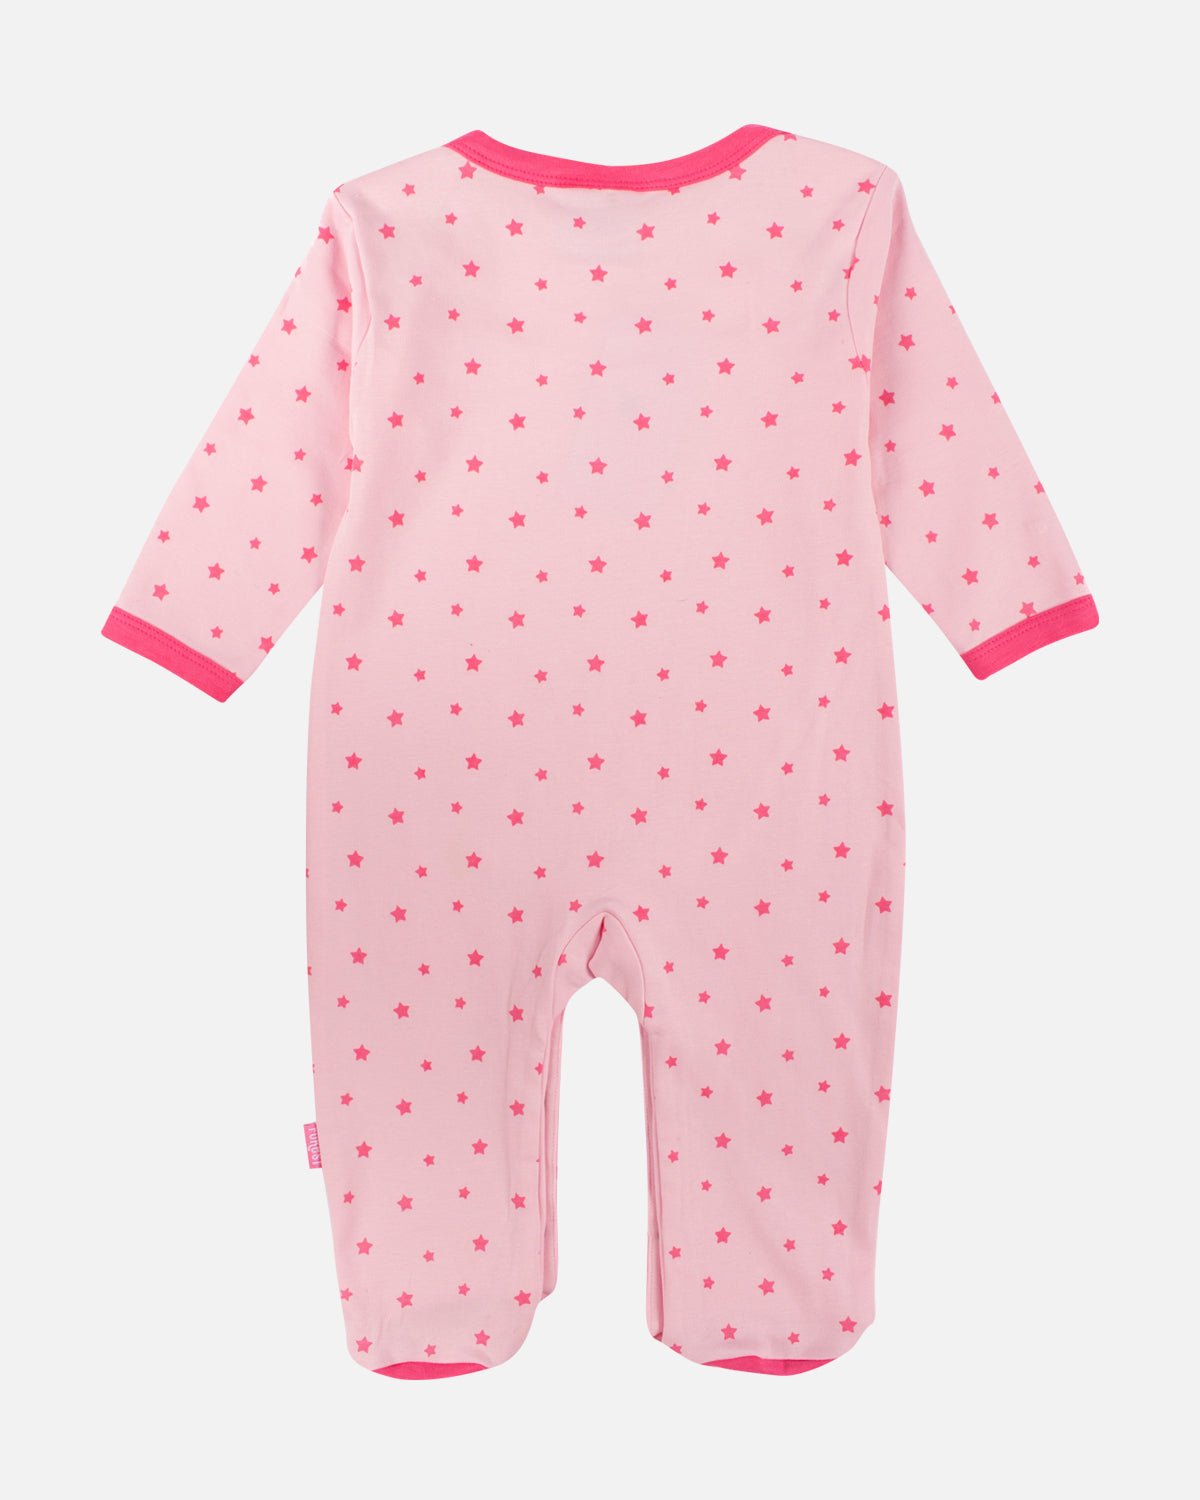 NFFC Stars Baby Sleepsuit - Nottingham Forest FC